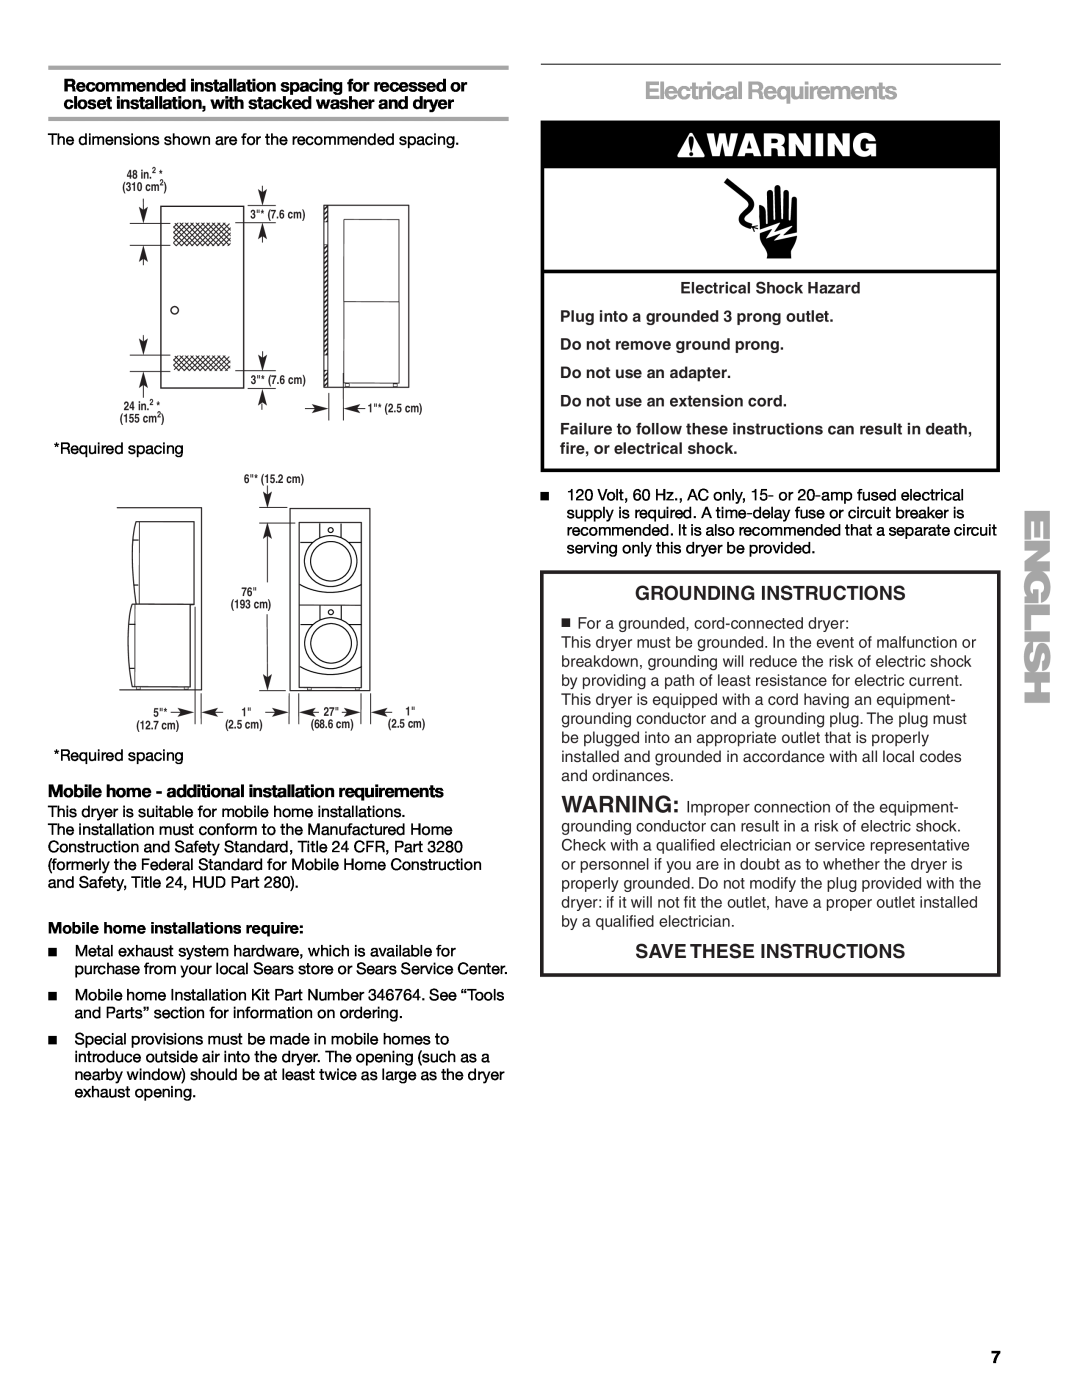 Sears 110.9708 Electrical Requirements, Grounding Instructions, Save These Instructions, Do not use an extension cord 